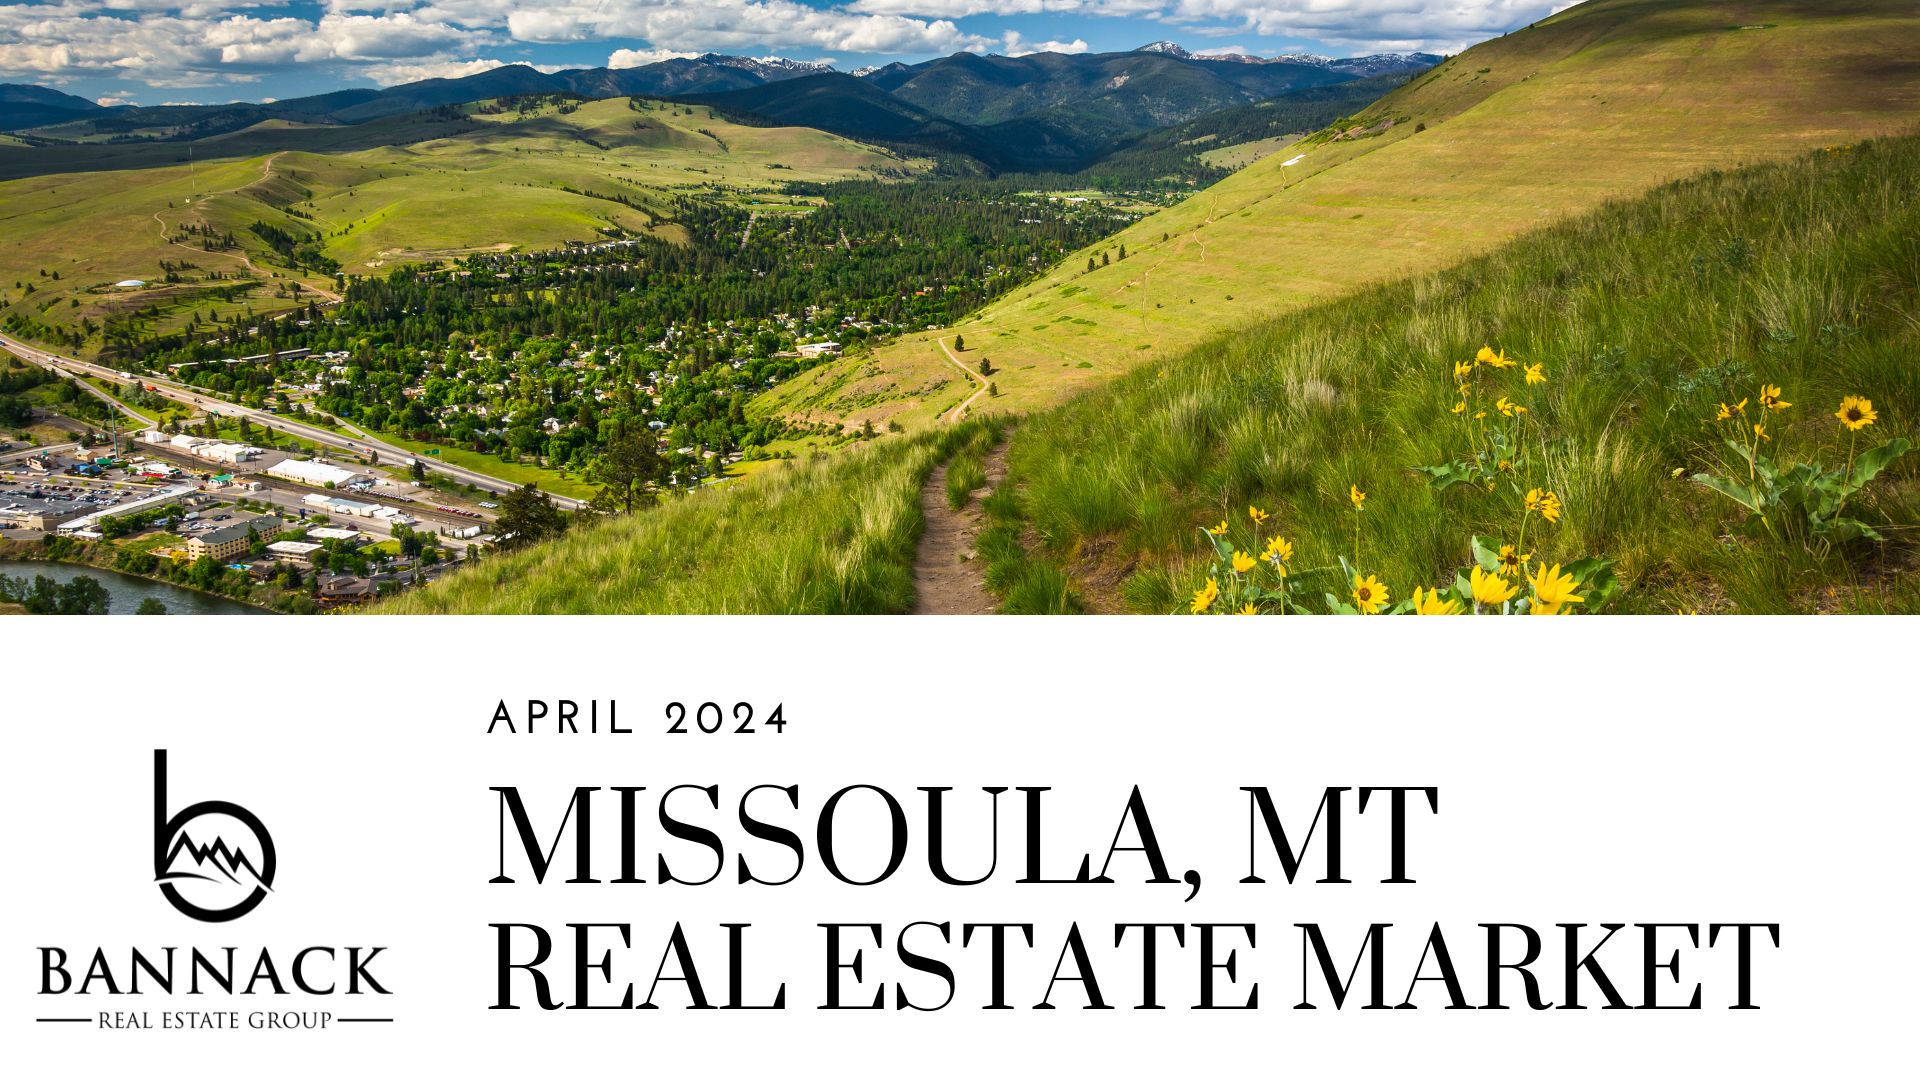 Exclusive Missoula MT Real Estate Market Insights: April 2024 Trends & Future Projections Revealed! image